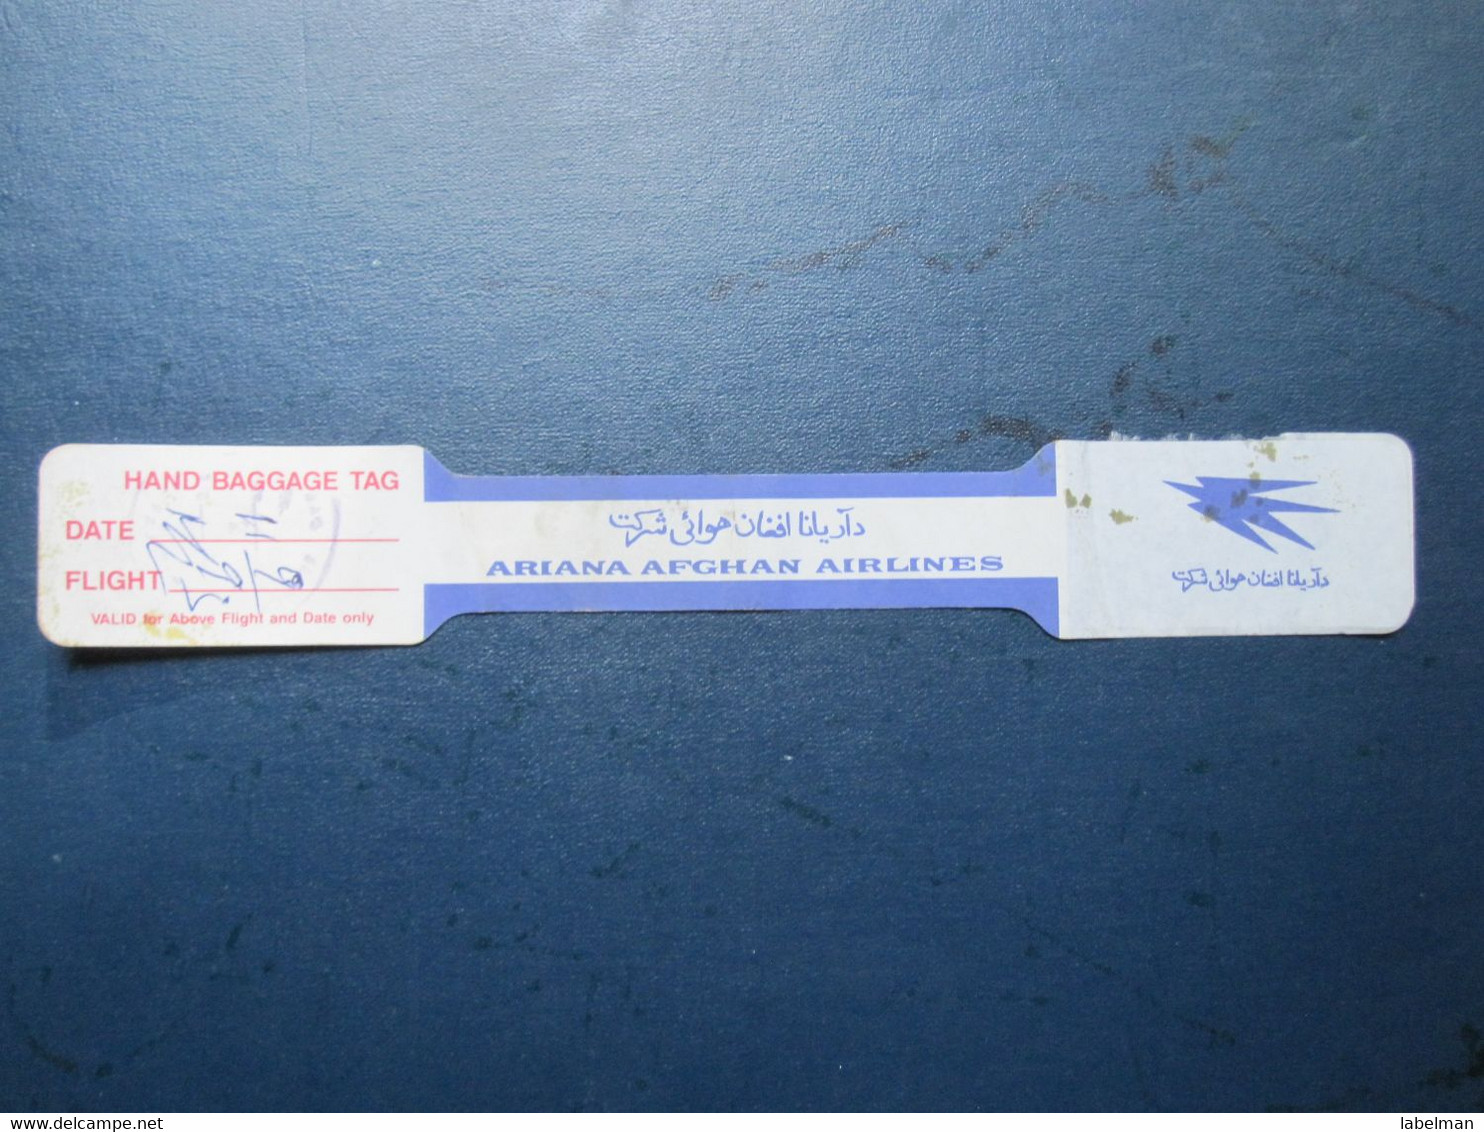 ARIANA AFGHAN AFGHANISTAN CARD WELCOME TICKET AIRWAYS AIRLINE STICKER LABEL TAG LUGGAGE BUGGAGE PLANE AIRCRAFT AIRPORT - Étiquettes à Bagages